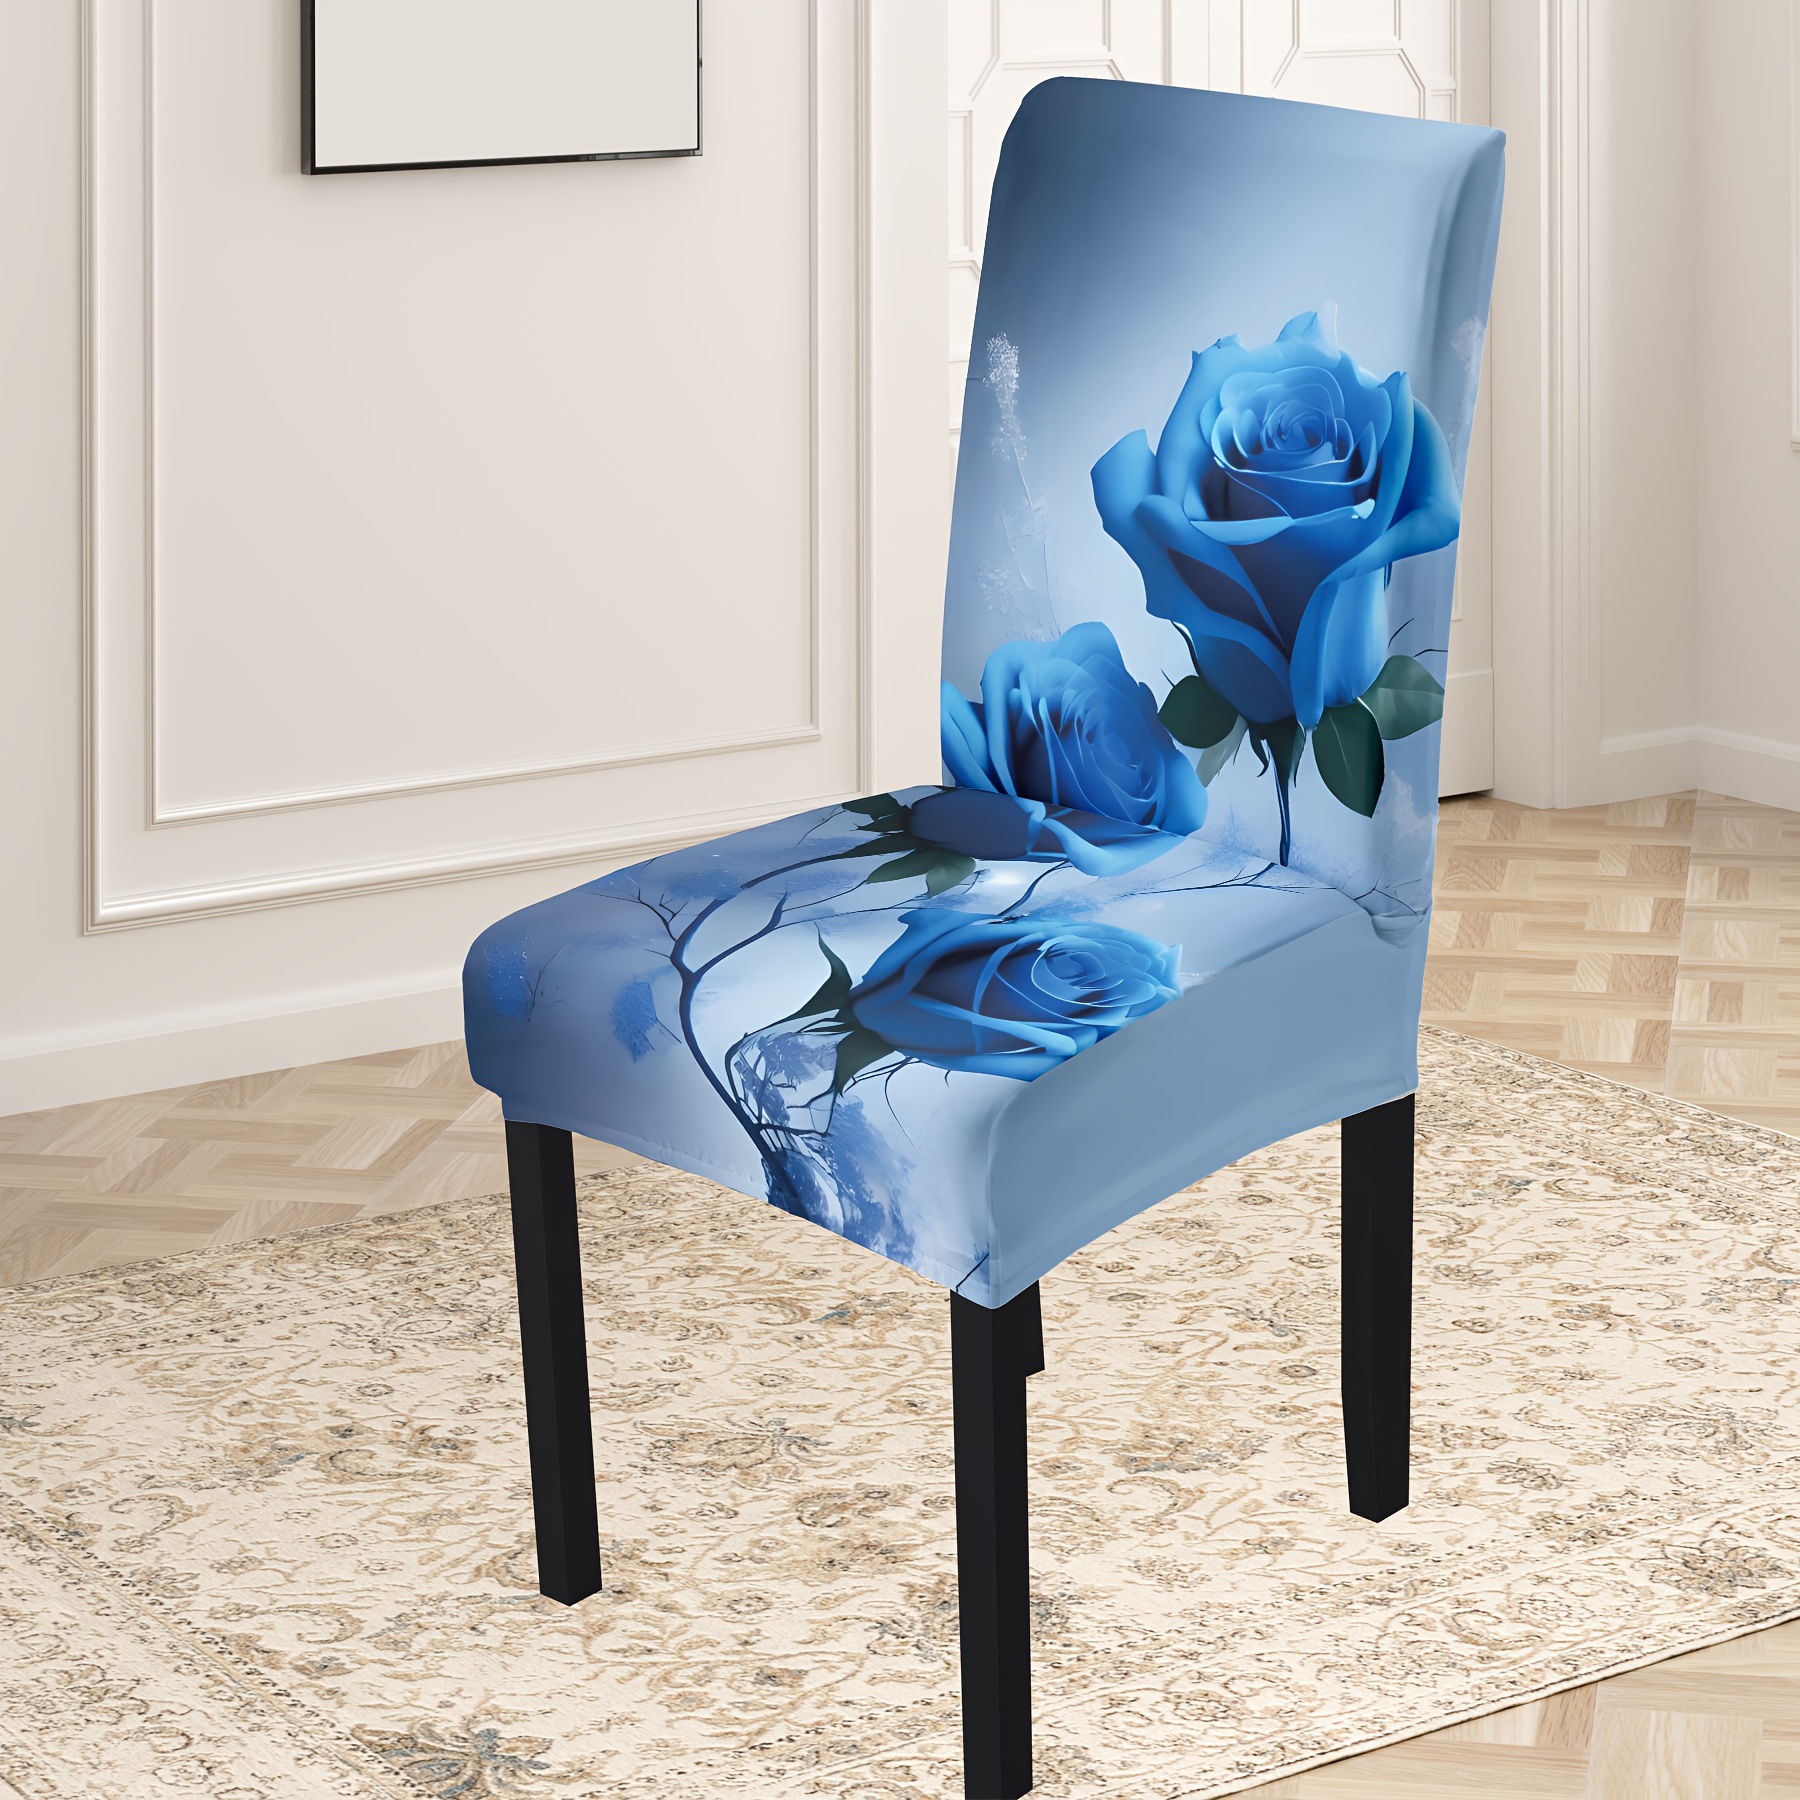 

4/6pcs Classic Design Chair Cover With Elastic Fabric, Blue Rose Print, Suitable For Kitchen, Living Room, Hotel, And Party Decor